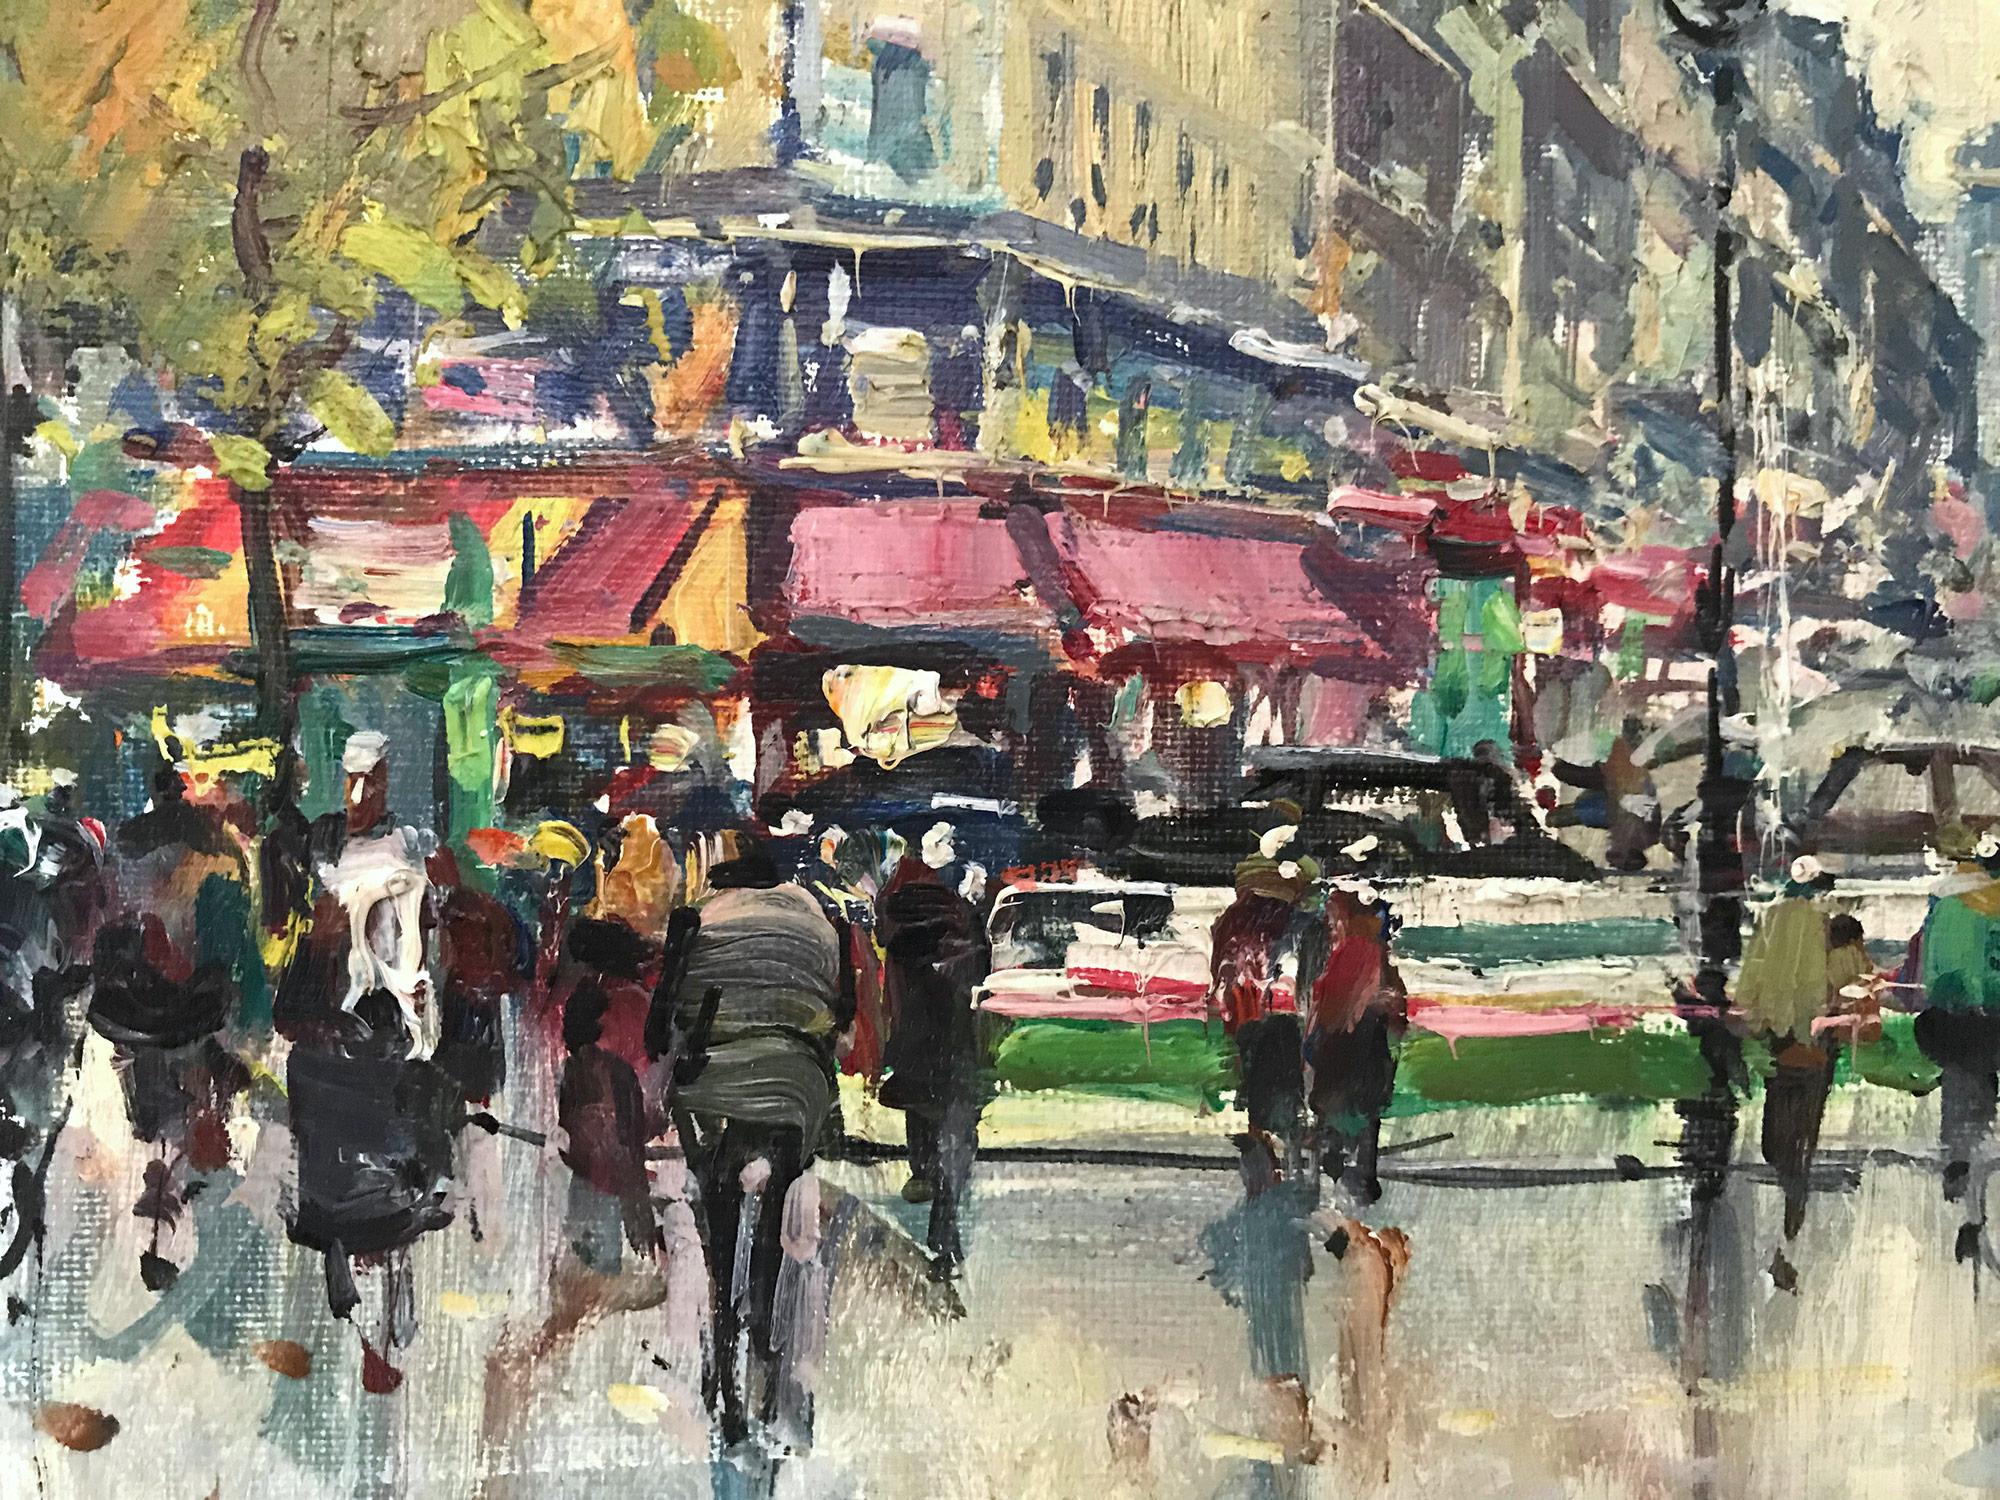 A beautiful oil on canvas painting by the French artist, Jean Salabet. This painting is a wonderful example of his work from the prime of his career. Here you see figures walking along the street and sidewalk with cars and buses by Cafés et Panthéon